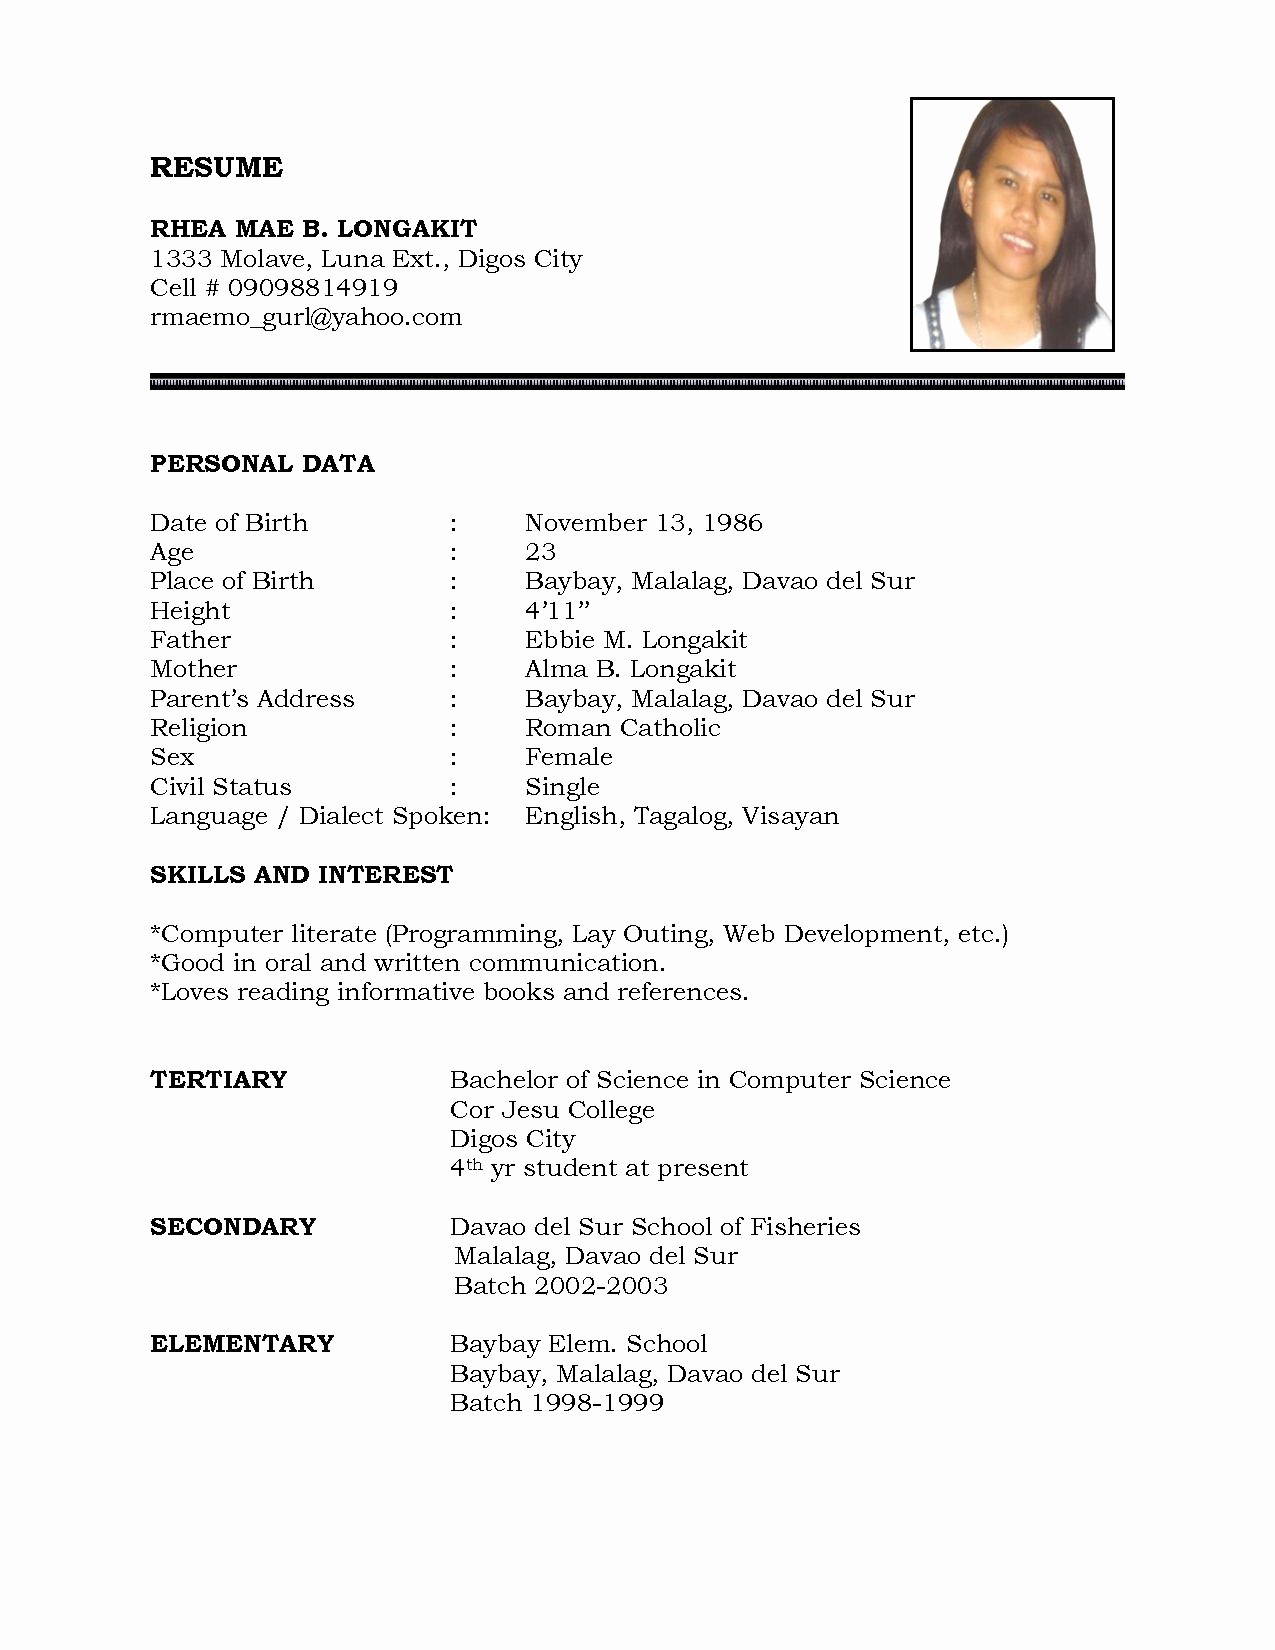 Sample Of A Simple Resume New Resume Sample Simple De9e2a60f the Simple format Resume